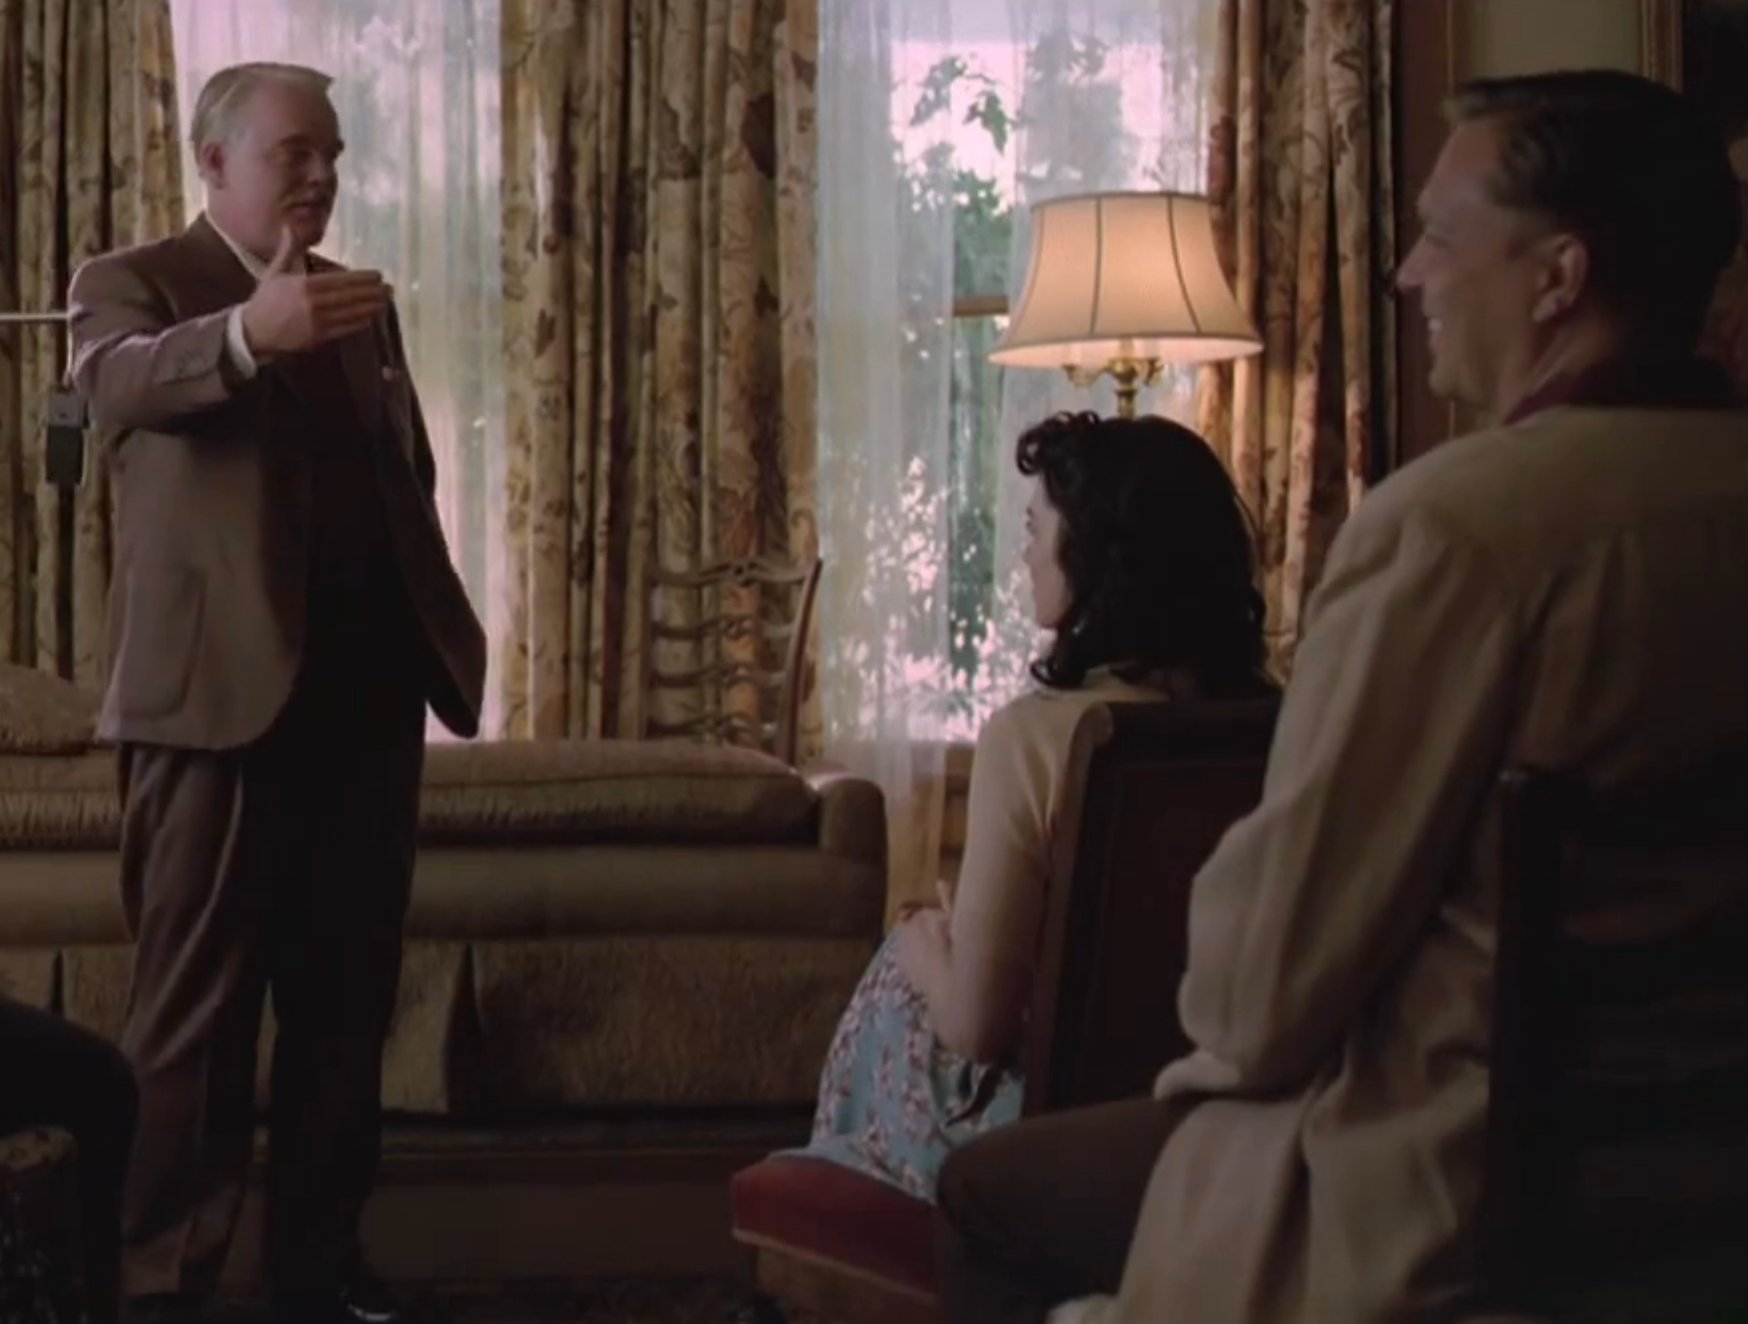 with Philip Seymour Hoffman in Paul Thomas Anderson's 